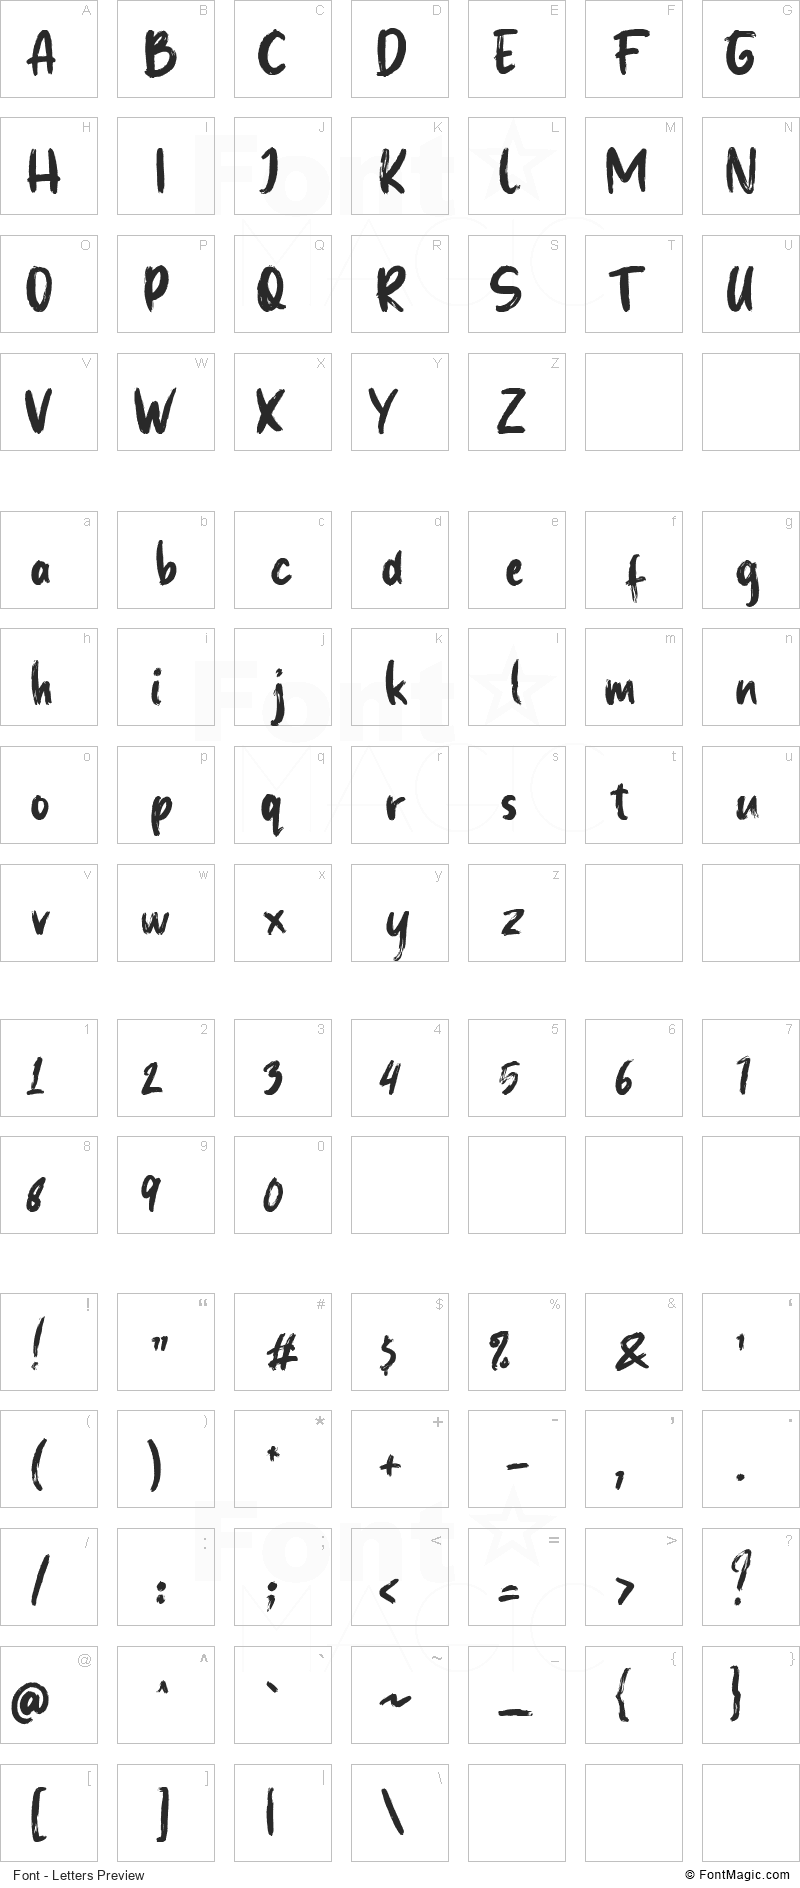 Wildrock Font - All Latters Preview Chart